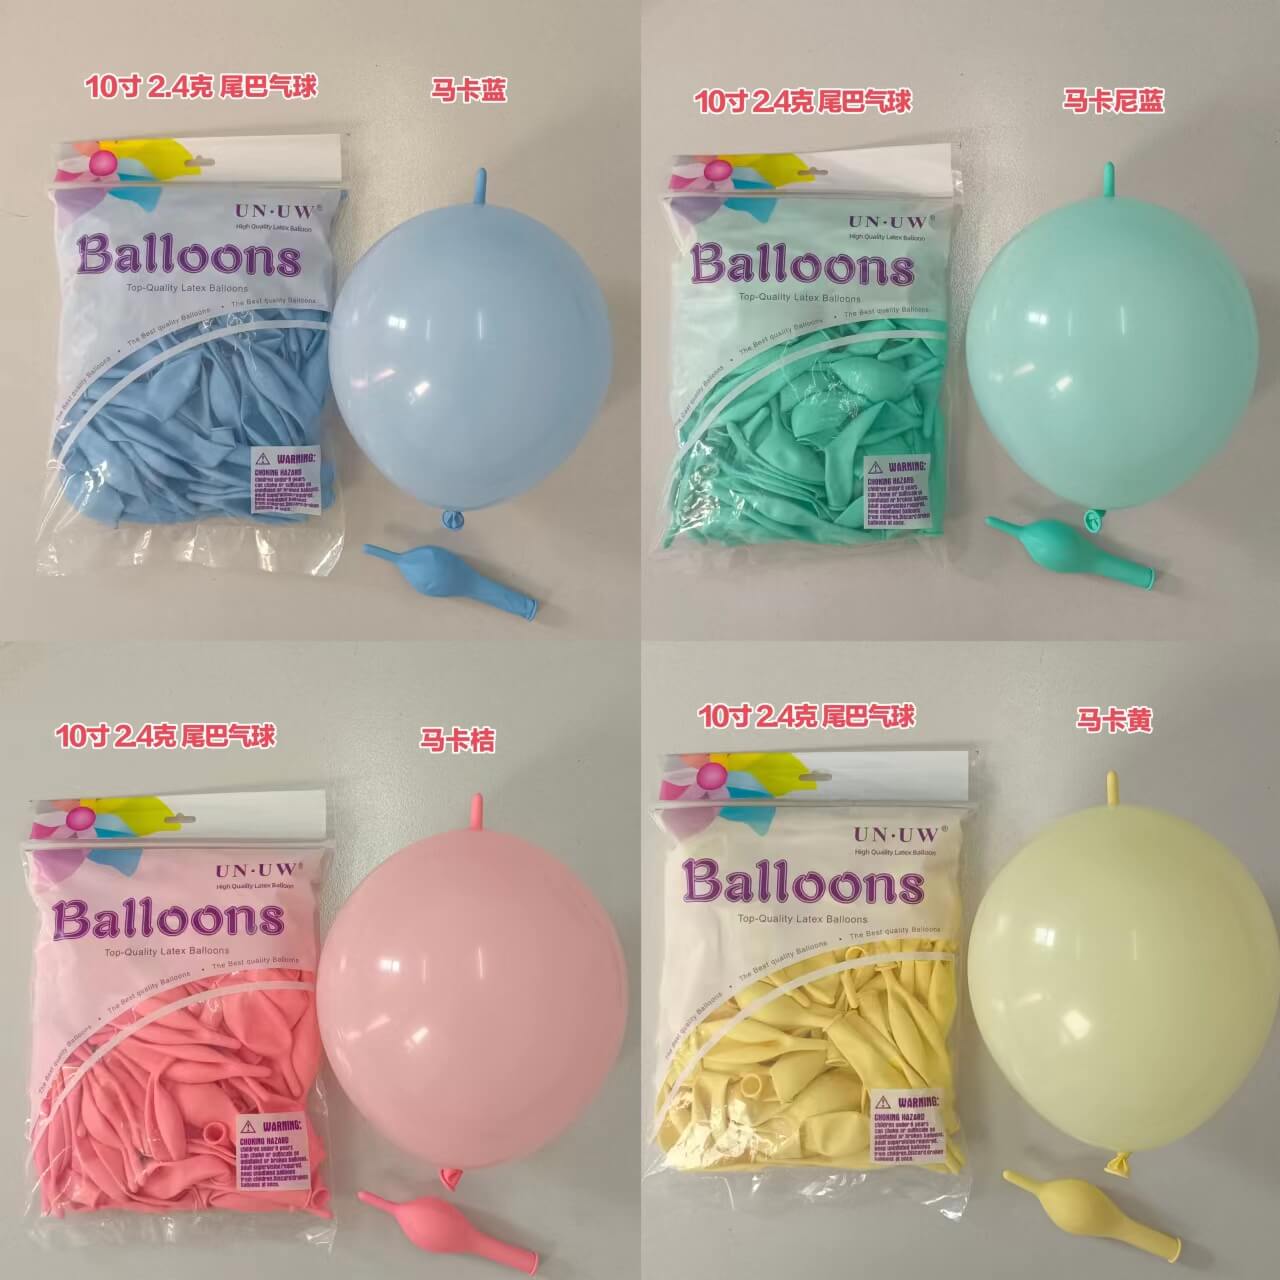 Premium Latex Balloons Filled with Helium for Stunning Decorations